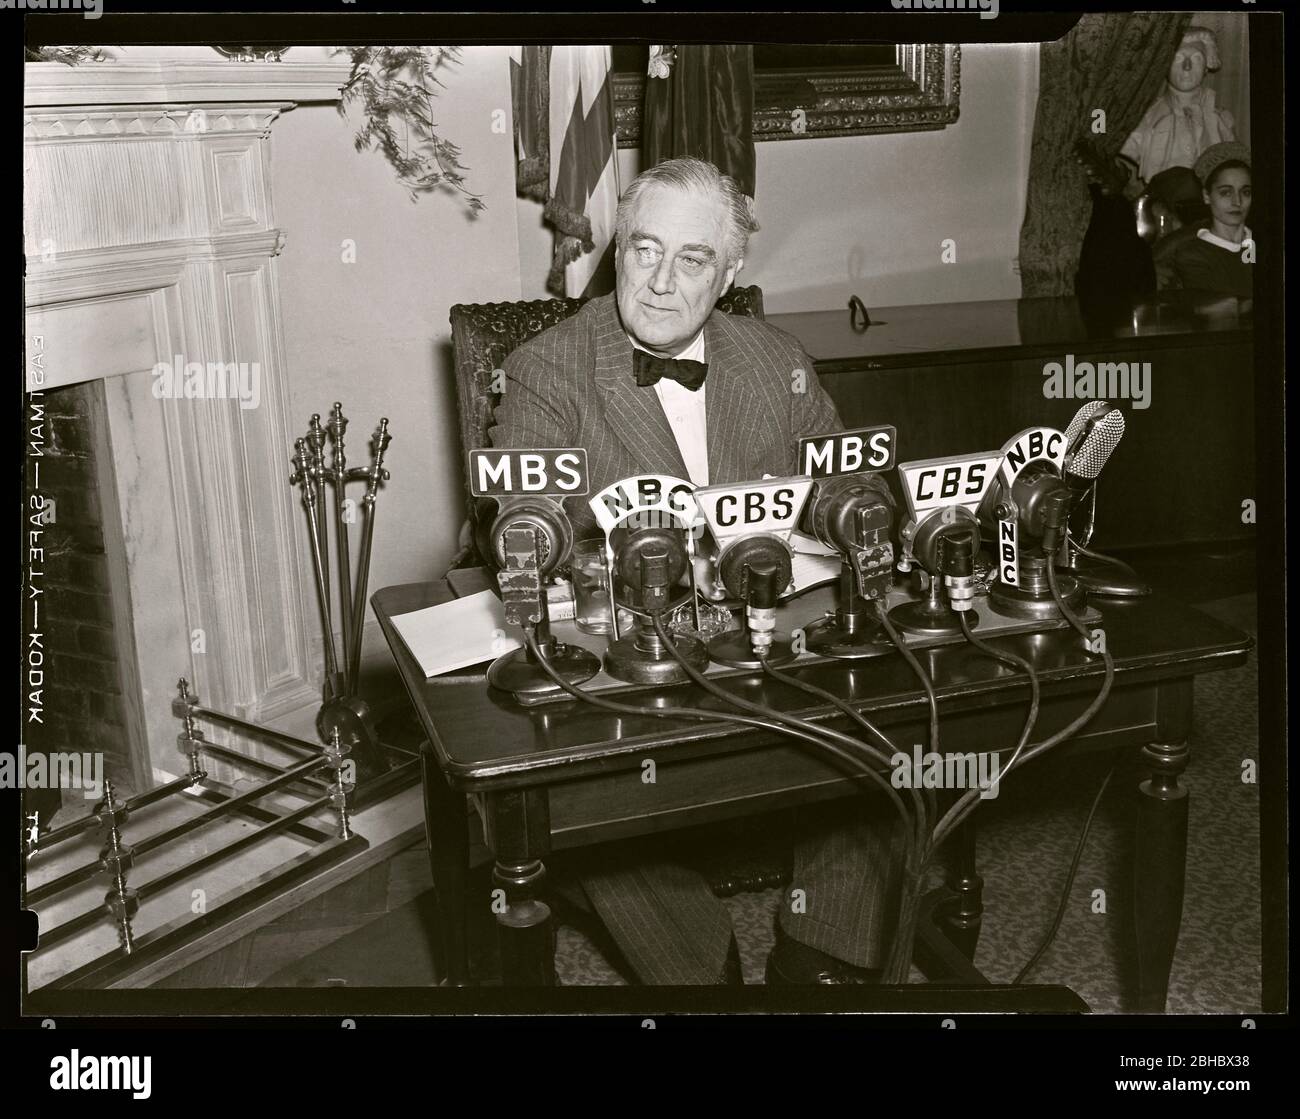 President Franklin D. Roosevelt "FDR" at news microphones gives fireside radio address just after two days the attack on Pearl Harbor, 1941. Image from 4x5 inch negative. Stock Photo